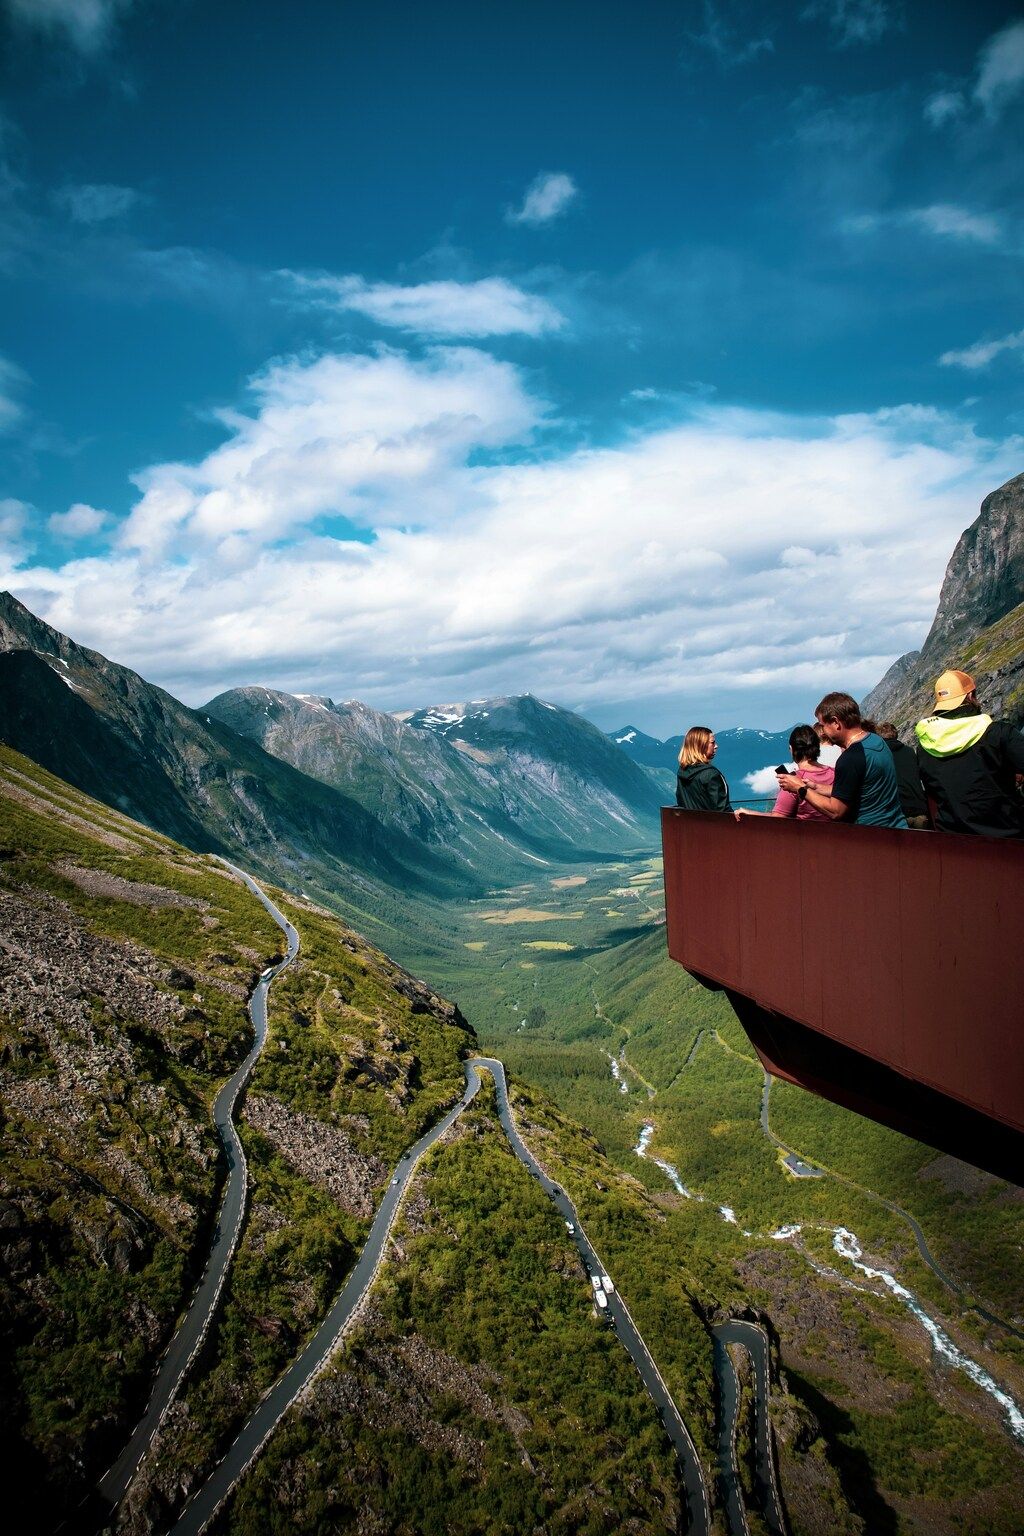 Visitors enjoying the breathtaking view from the Trollstigen viewpoint, overlooking the winding mountain road and lush valley below